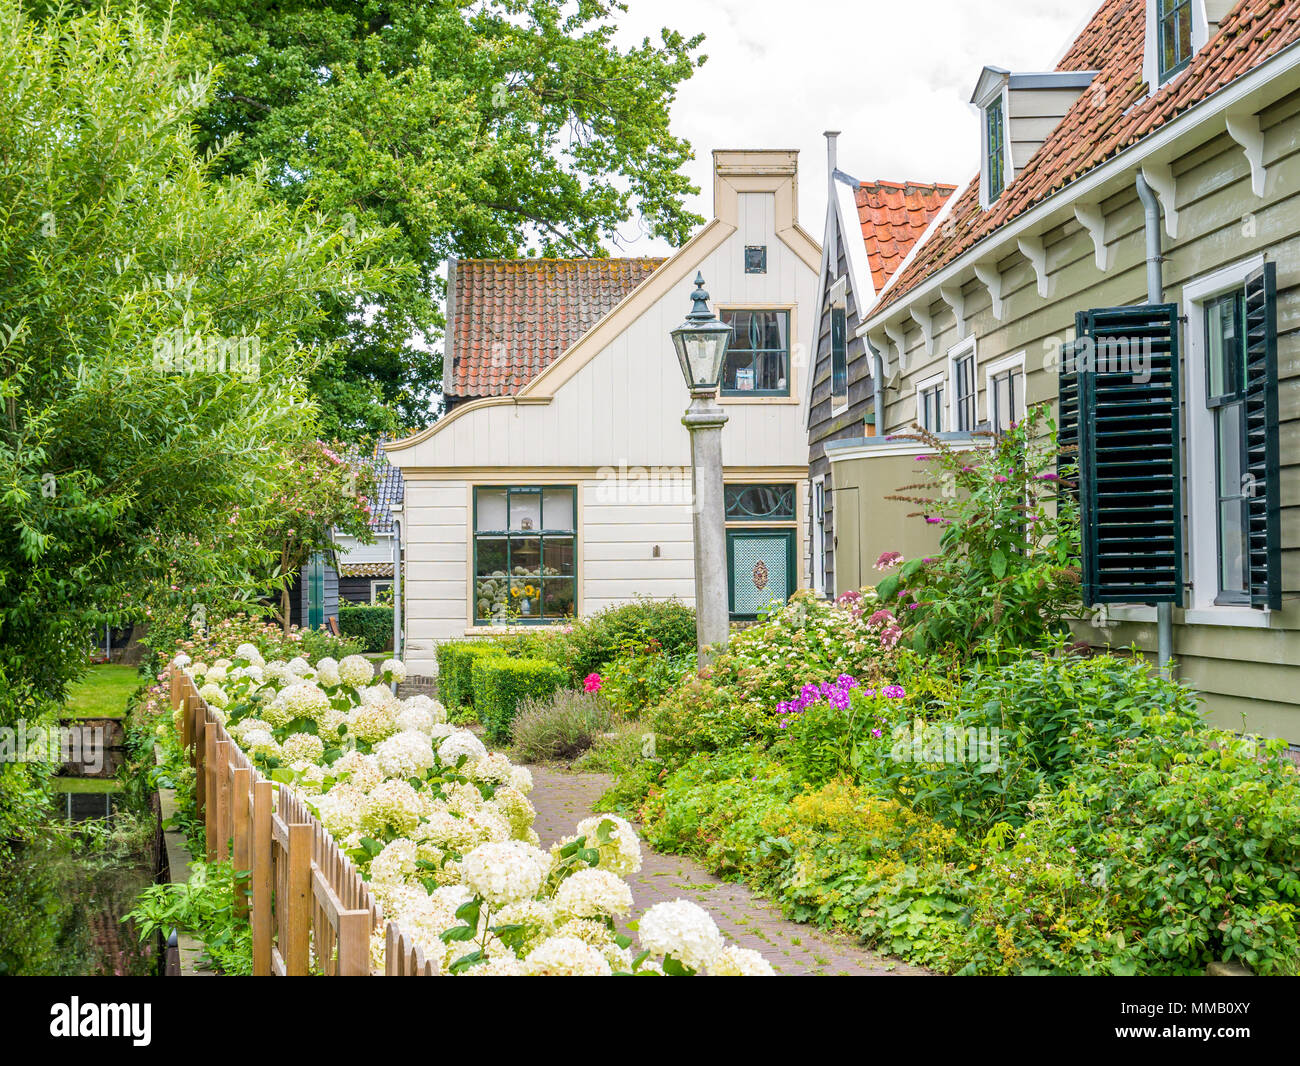 Wooden house and garden with plants and flowers in picturesque old town of Broek in Waterland, Noord-Holland, Netherlands Stock Photo